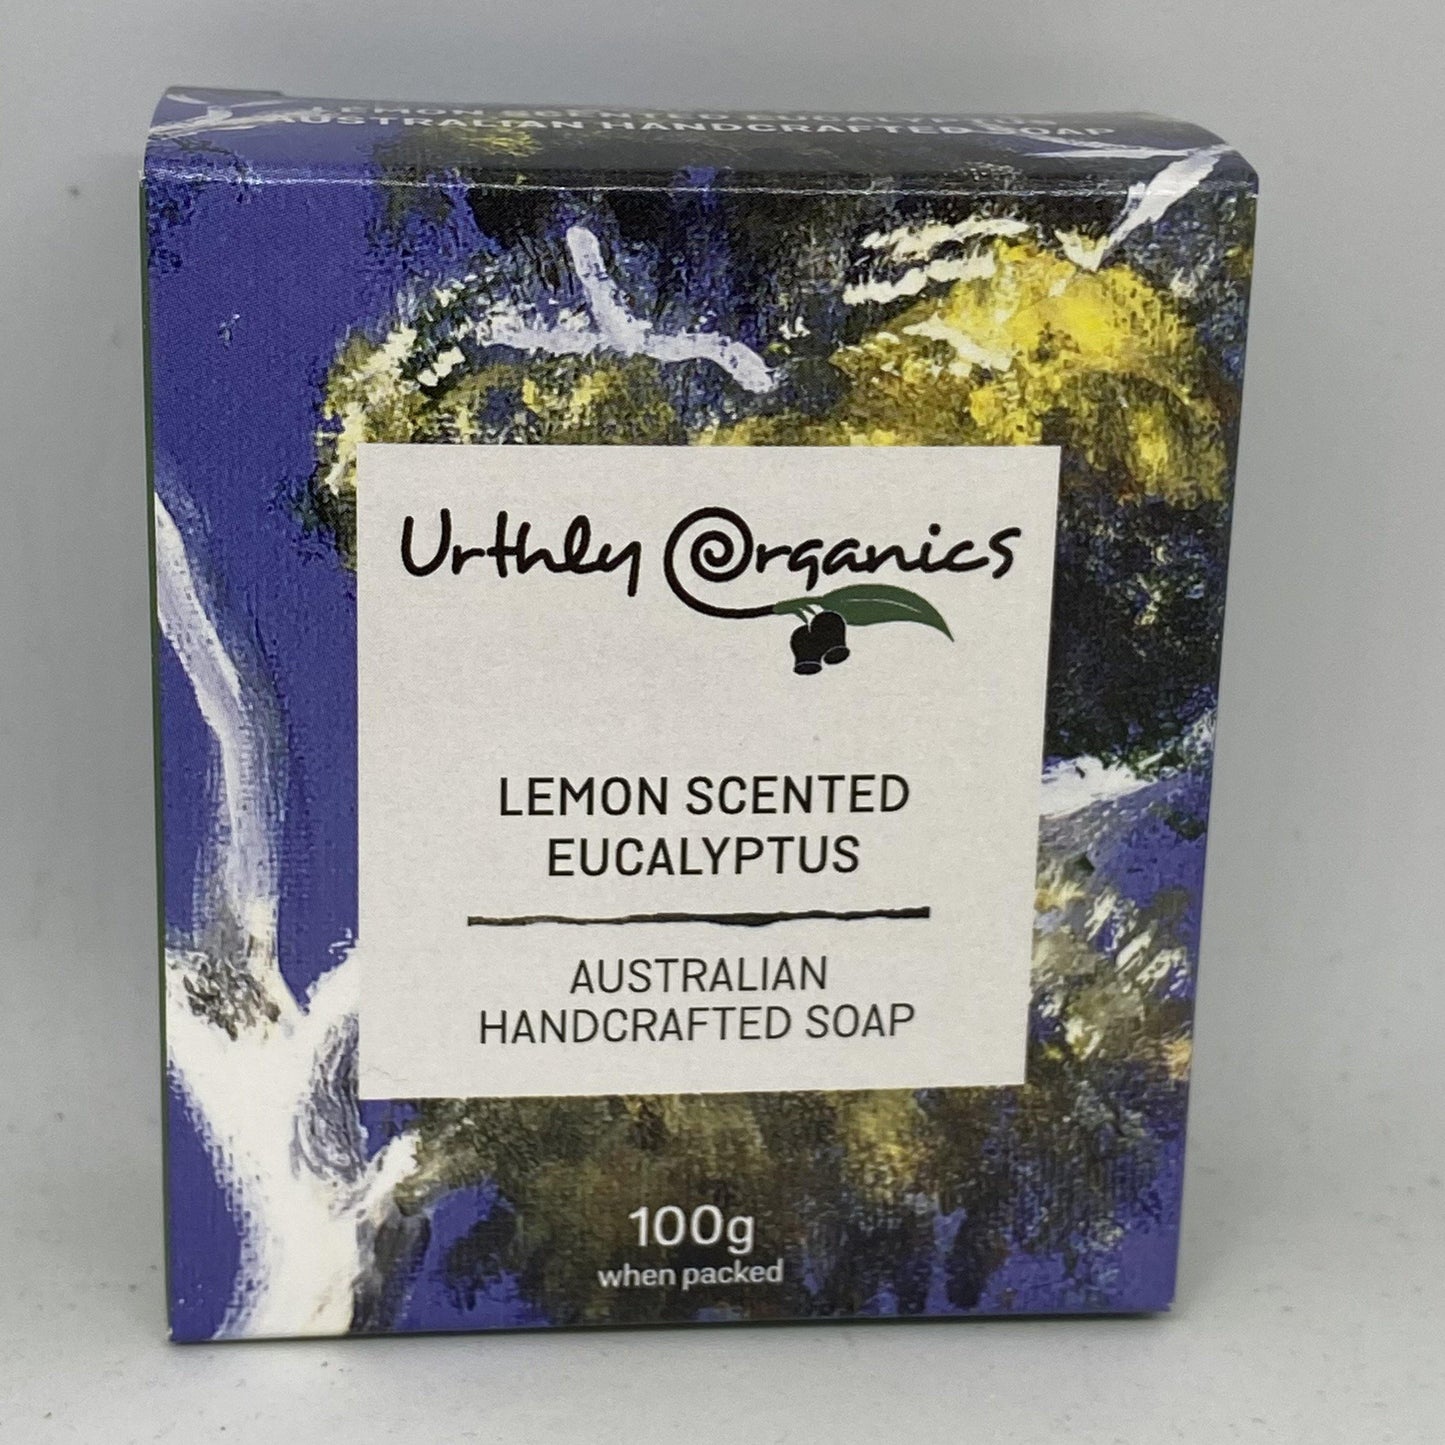 Lemon Scented eucalyptus - UrthlyOrganics Natural ethical skincare and cleaning